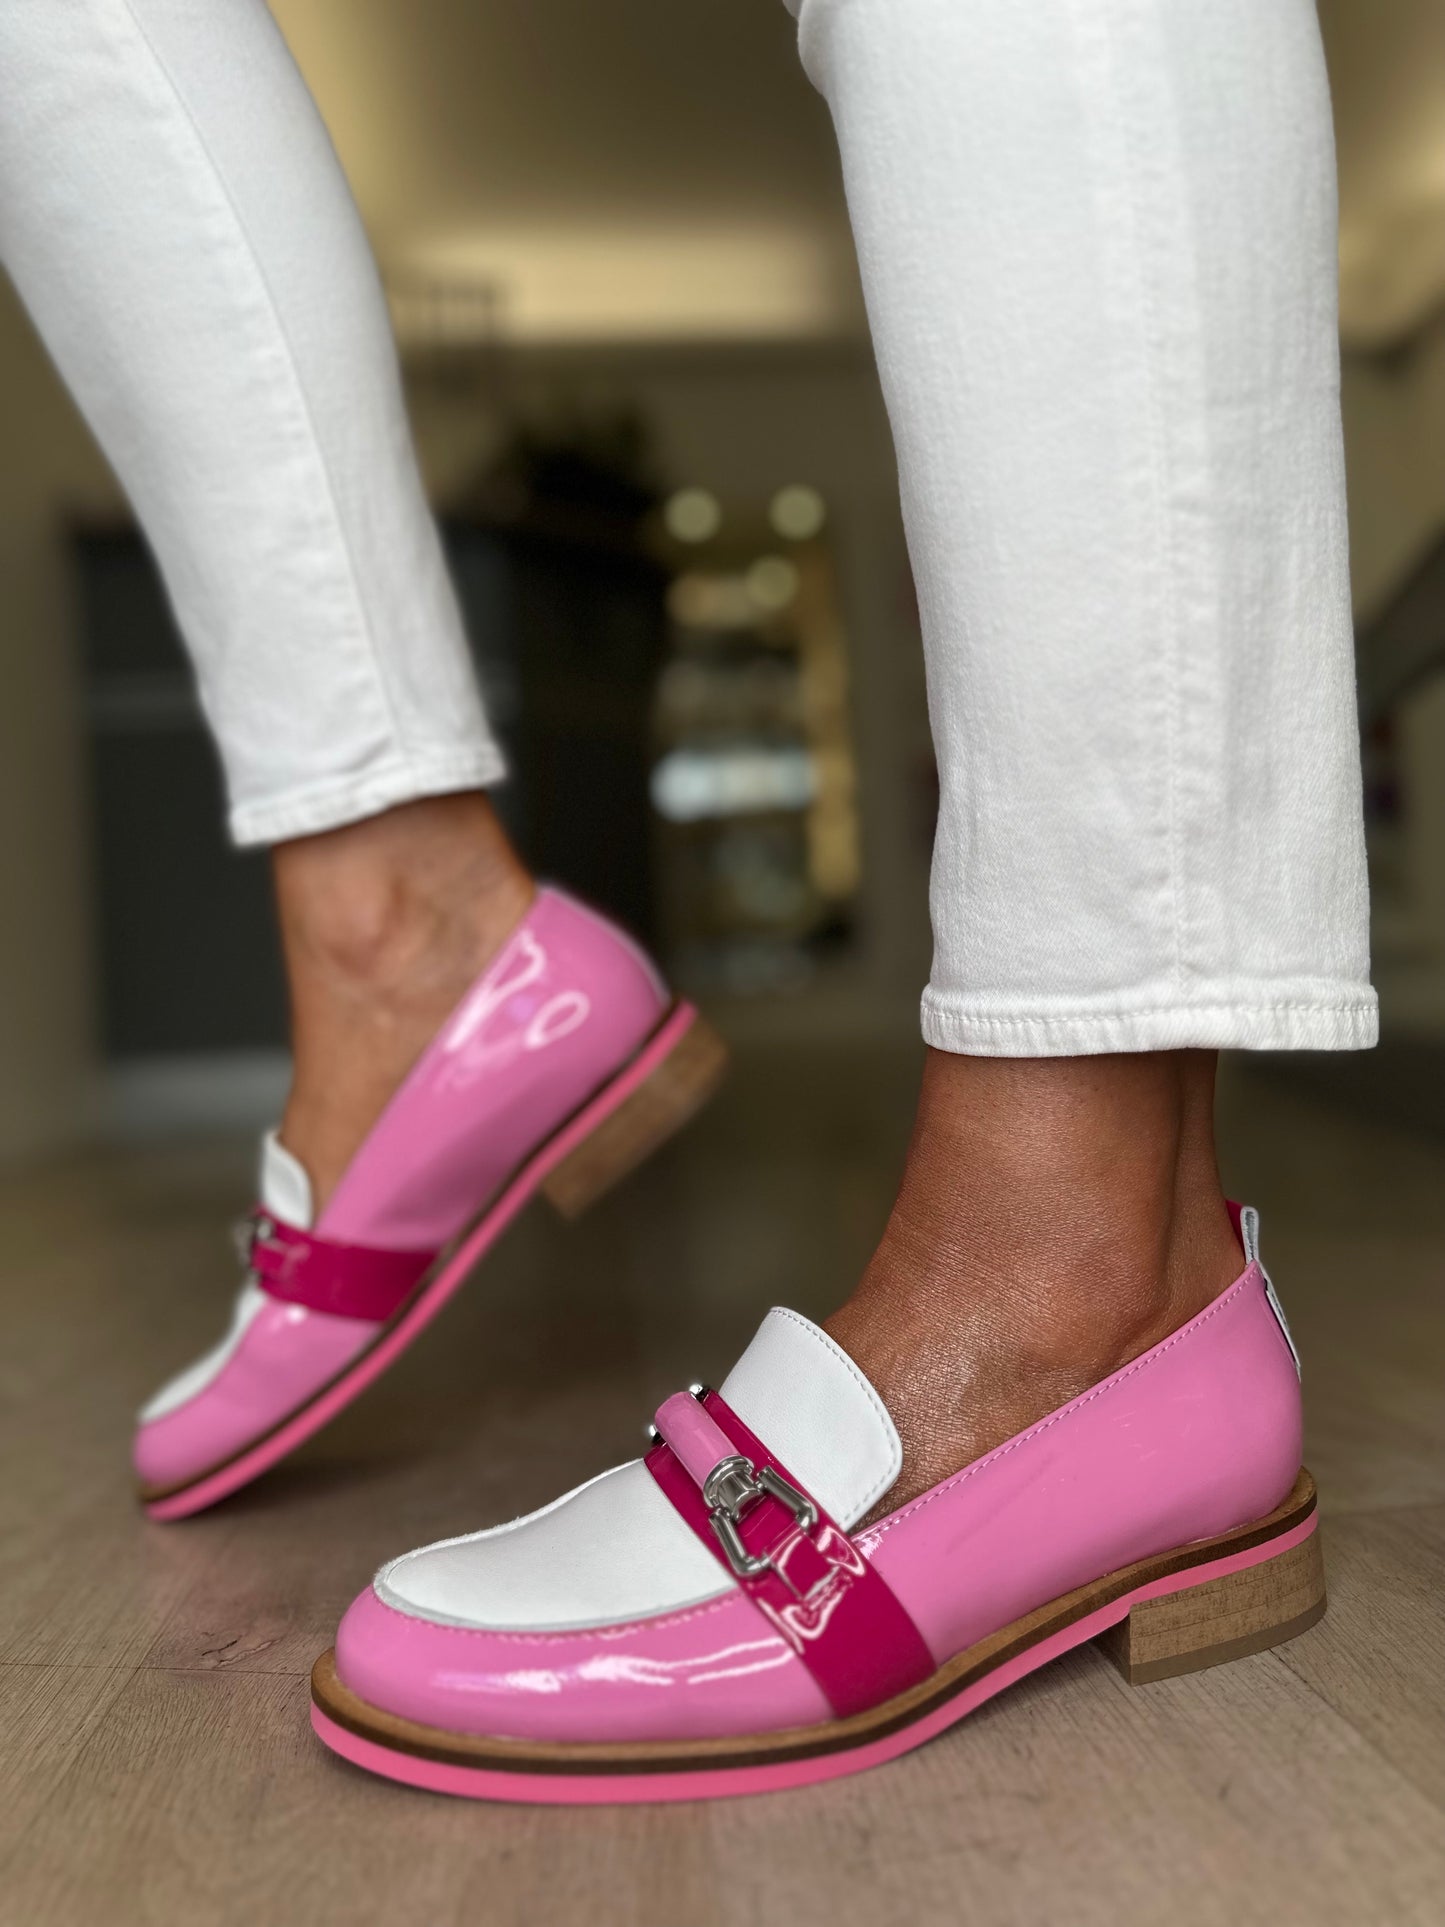 Marco Moreo -Barbie Pink Patent Loafer With Hot Pink/White Patent Trim